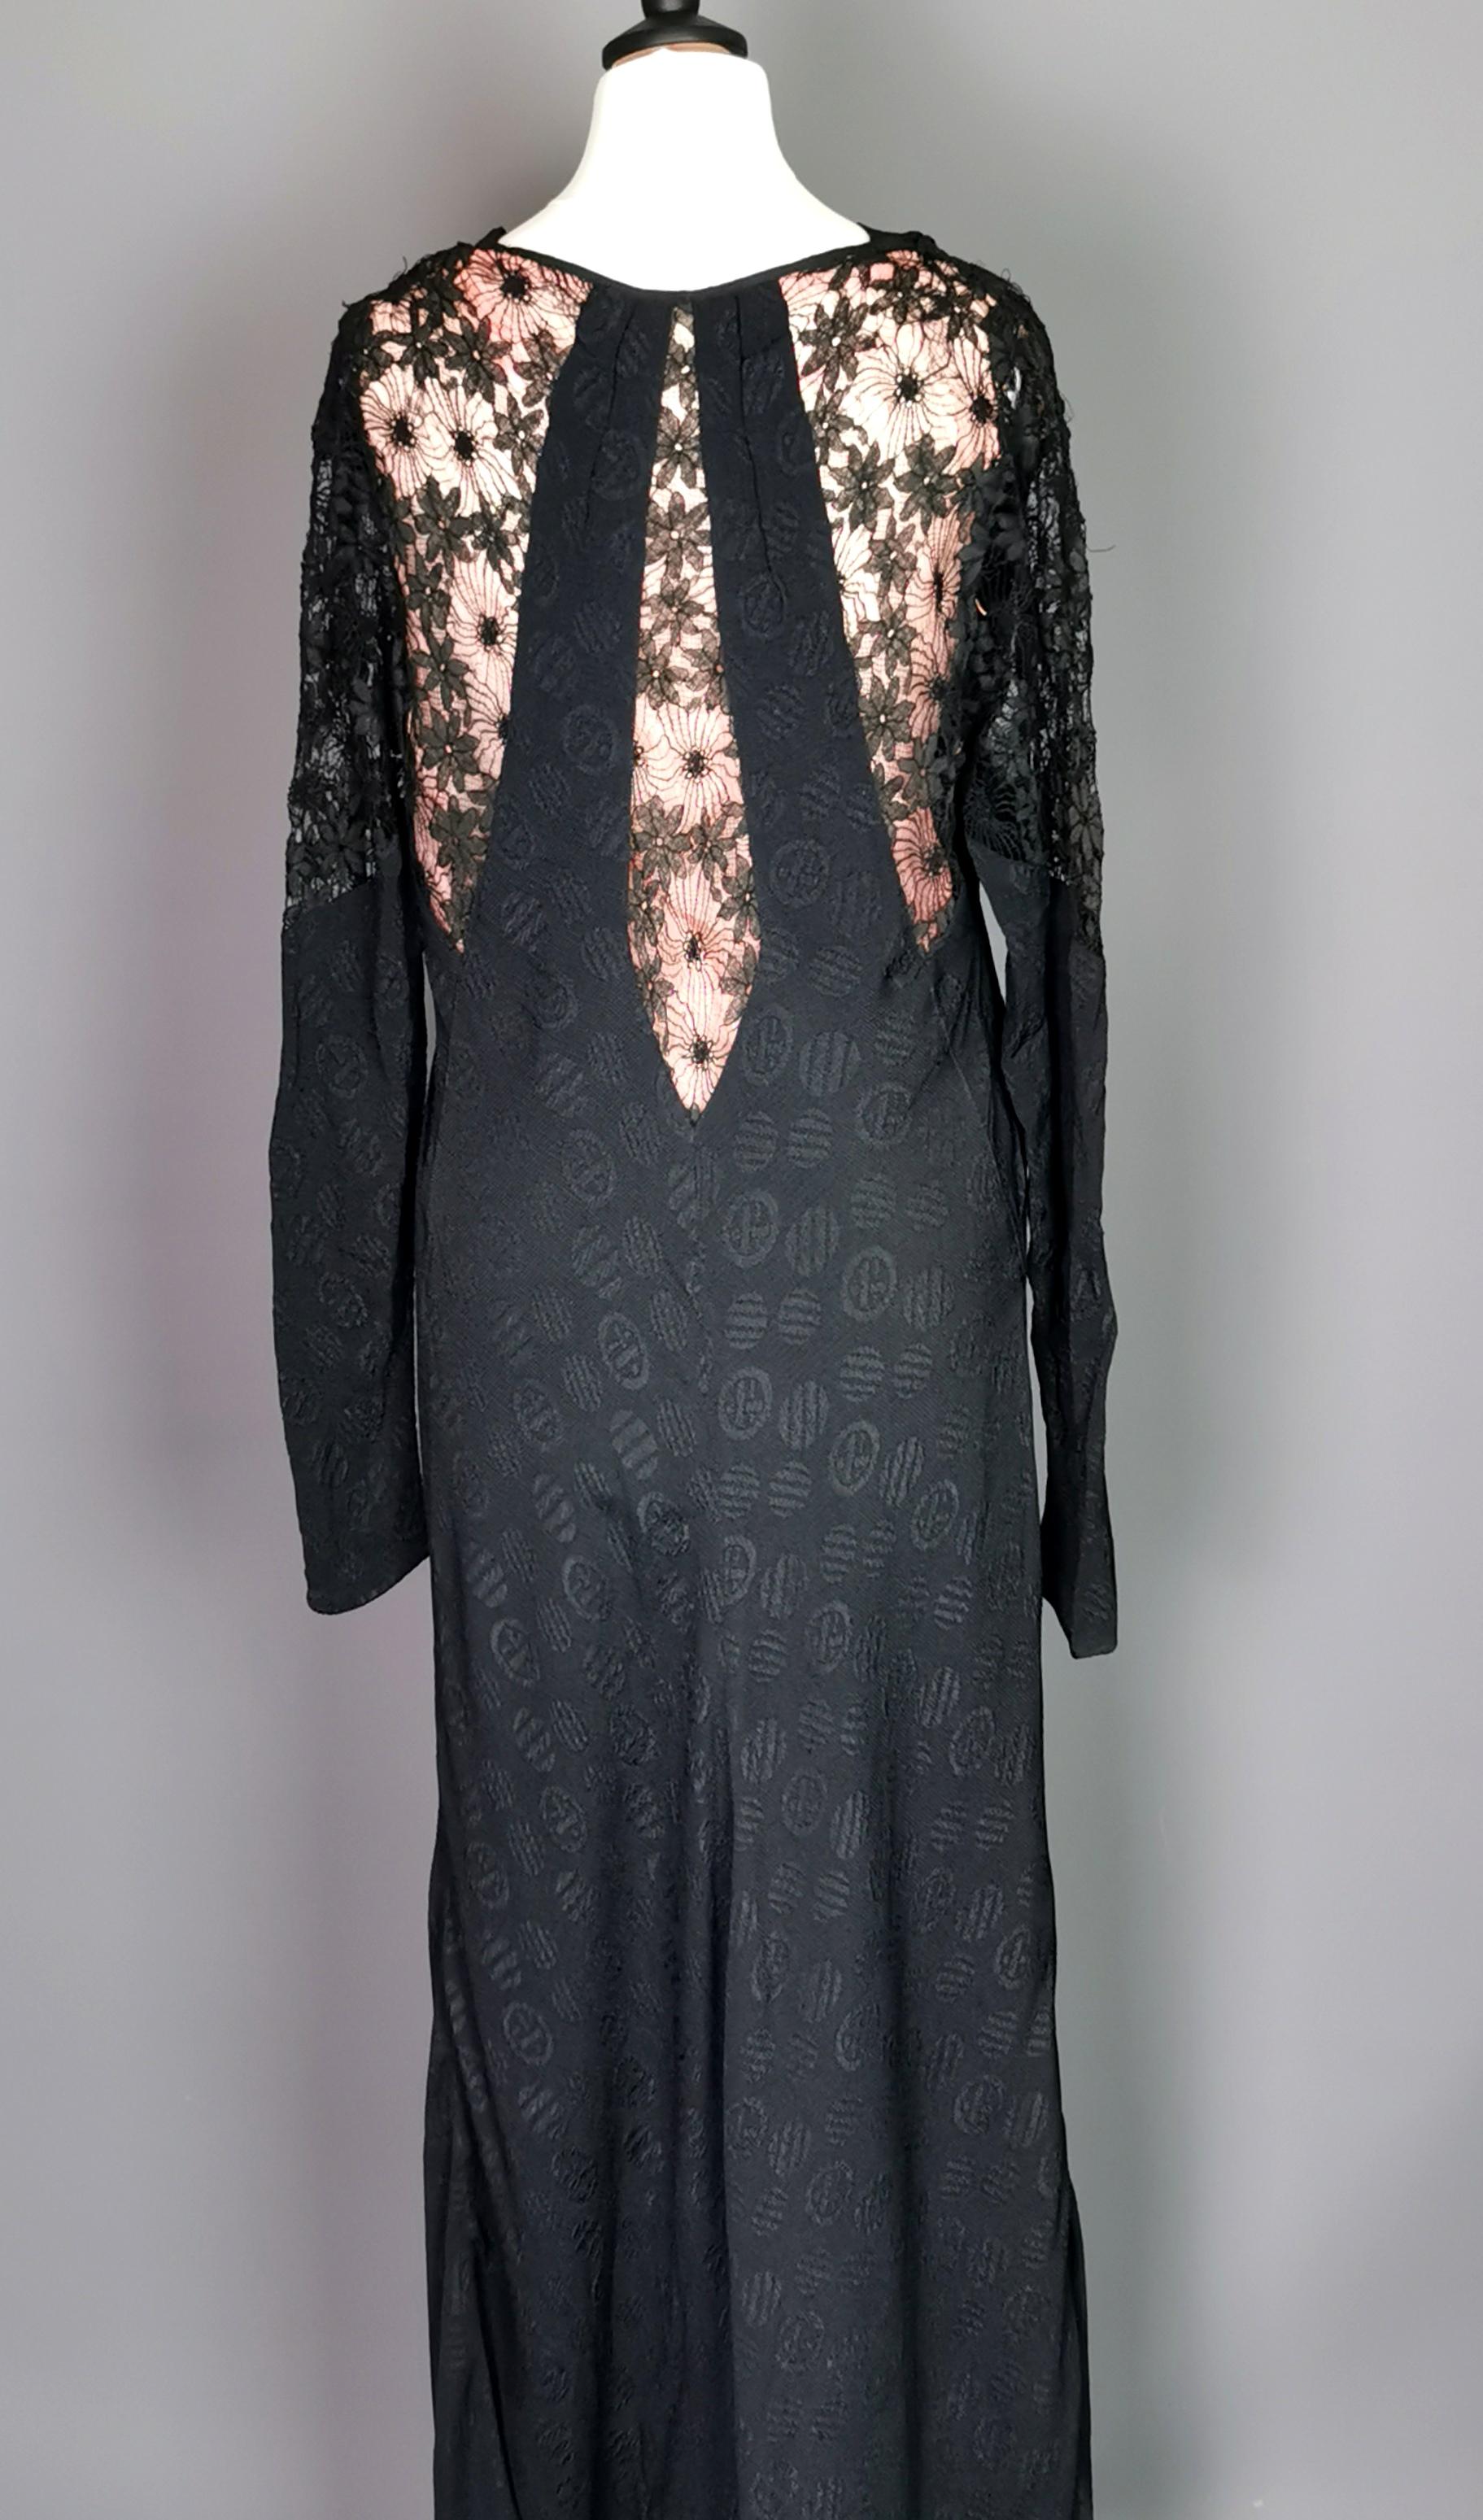 A gorgeous, slinky and vampy vintage 1930's Black rayon eve dress with lace detailing and a pink back.

A long sleeves dress with a rolled cowl neck, cinched in at the waist with a beautiful bias cut and a killer figure hugging silhouette.

It has a